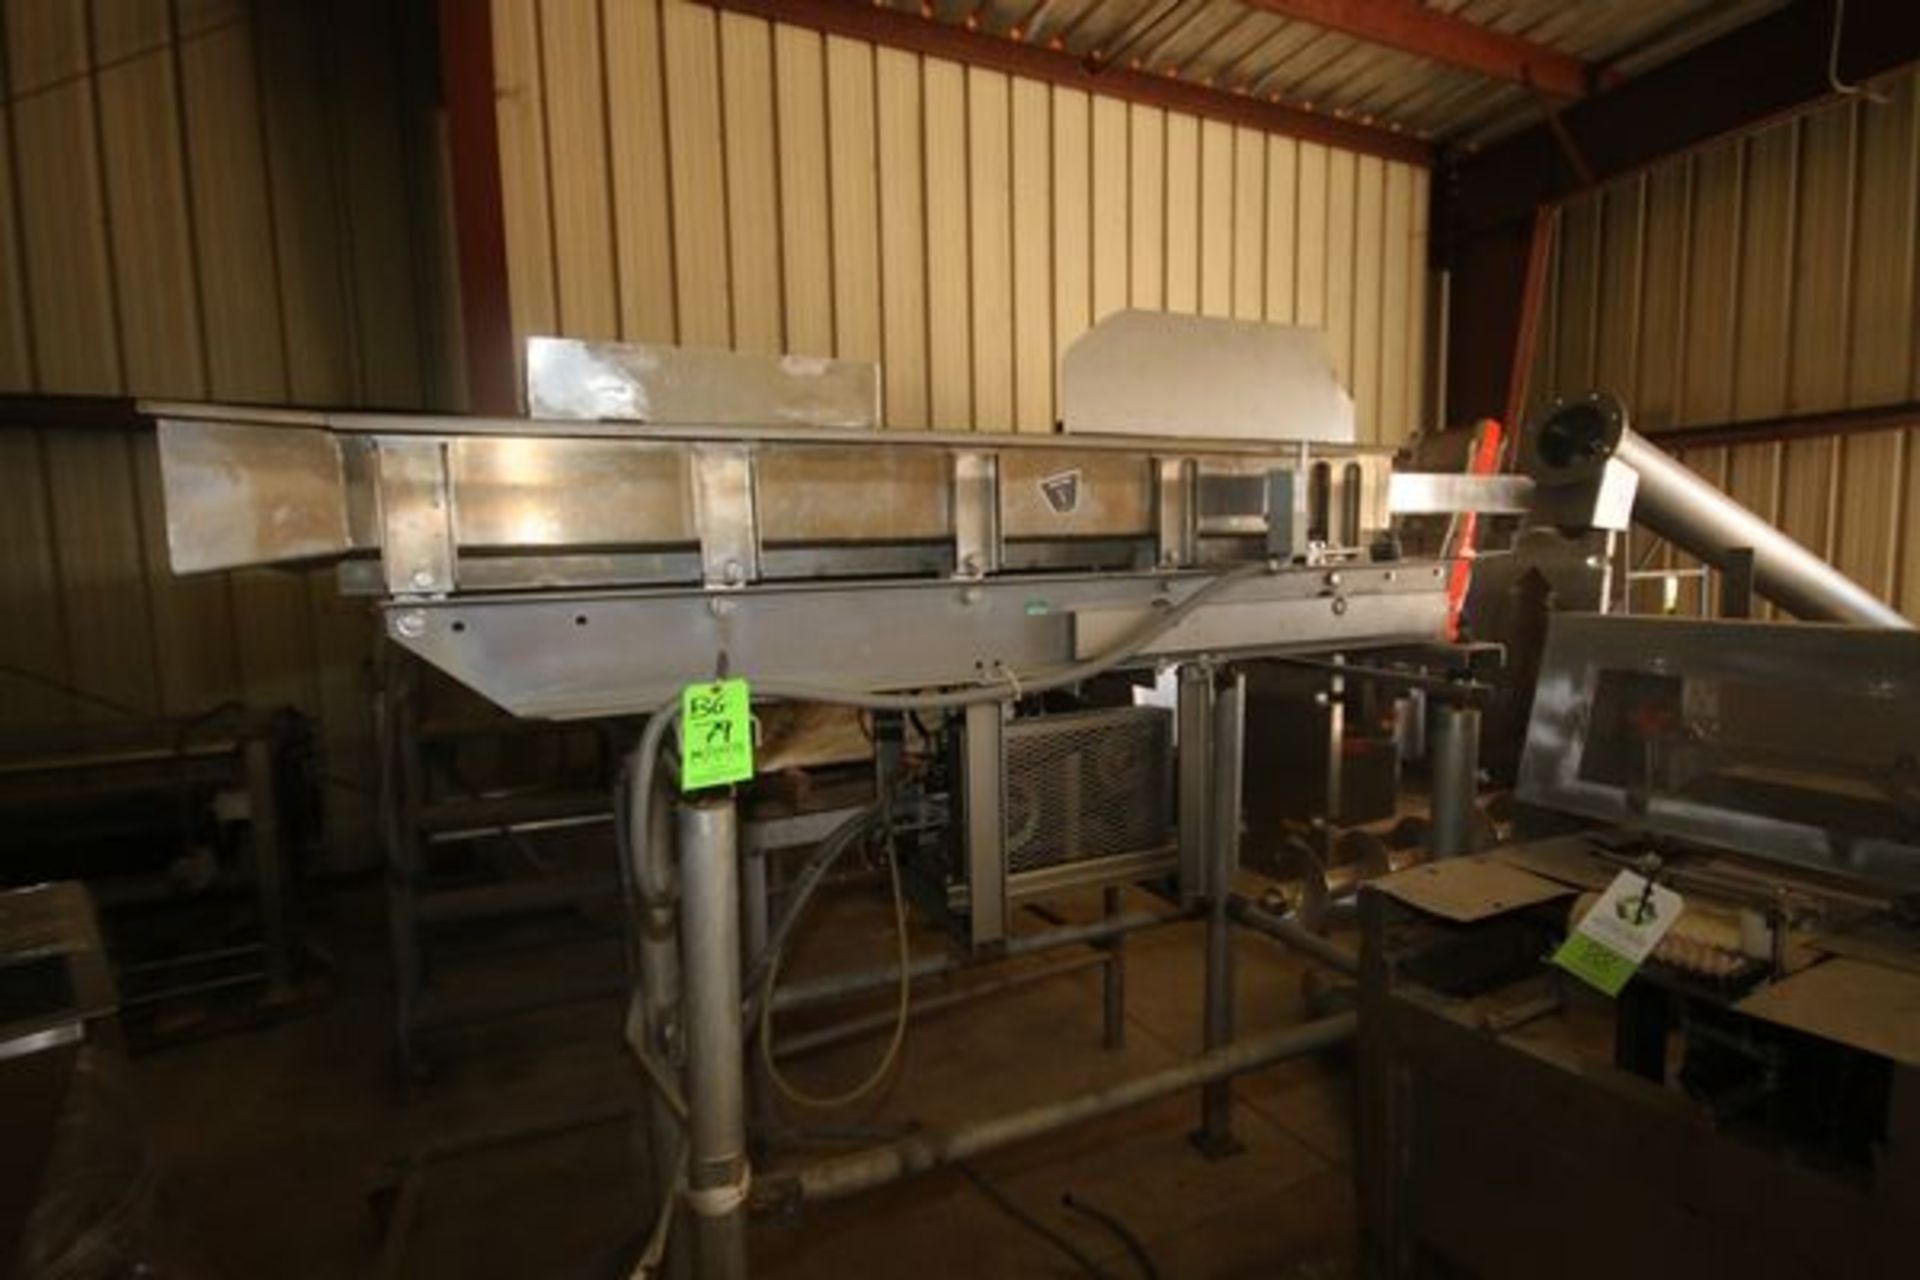 Triangle S/S Vibratory Conveyor, M/N SE1806-6, S/N 15955, 18" Wide x 72" Long (BG79) ***Located in